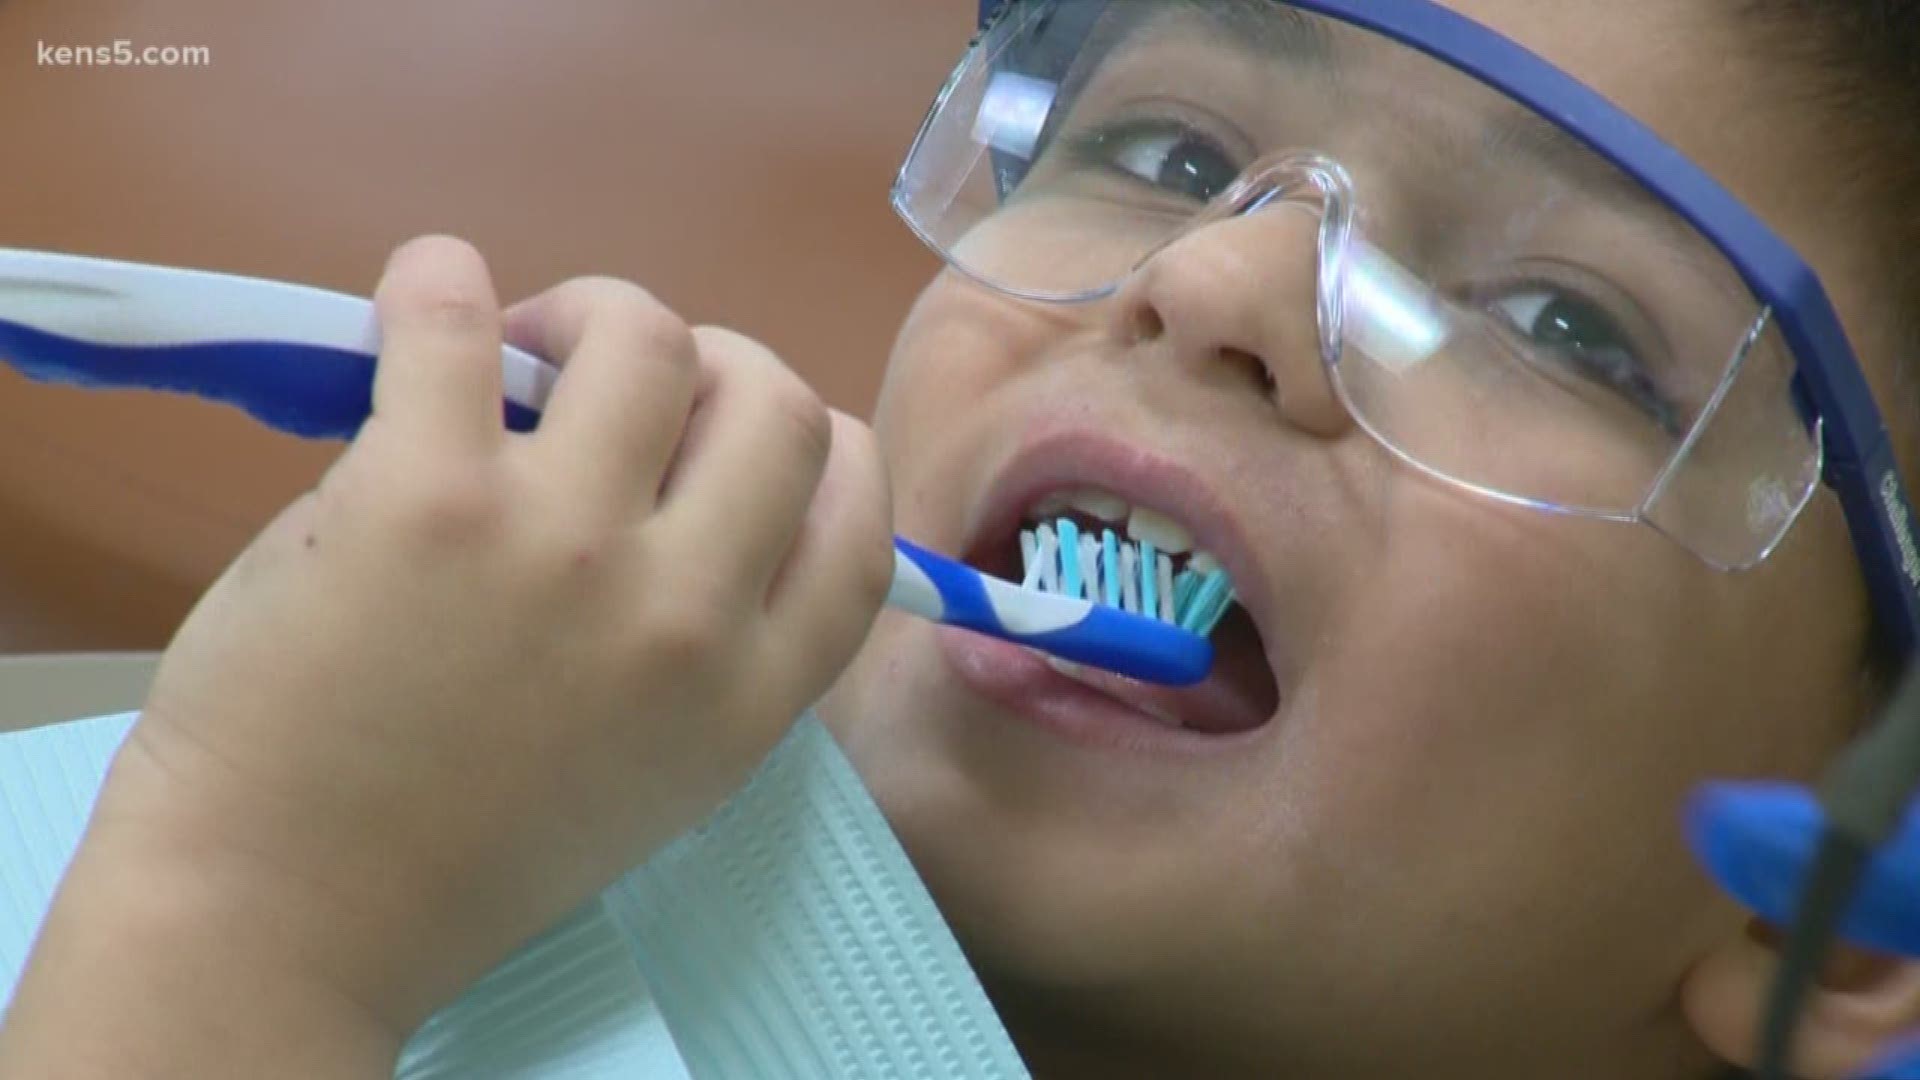 Several dozen kids were bussed to the UT San Antonio's School of Dentistry Friday morning, where they received free dental care from college students.